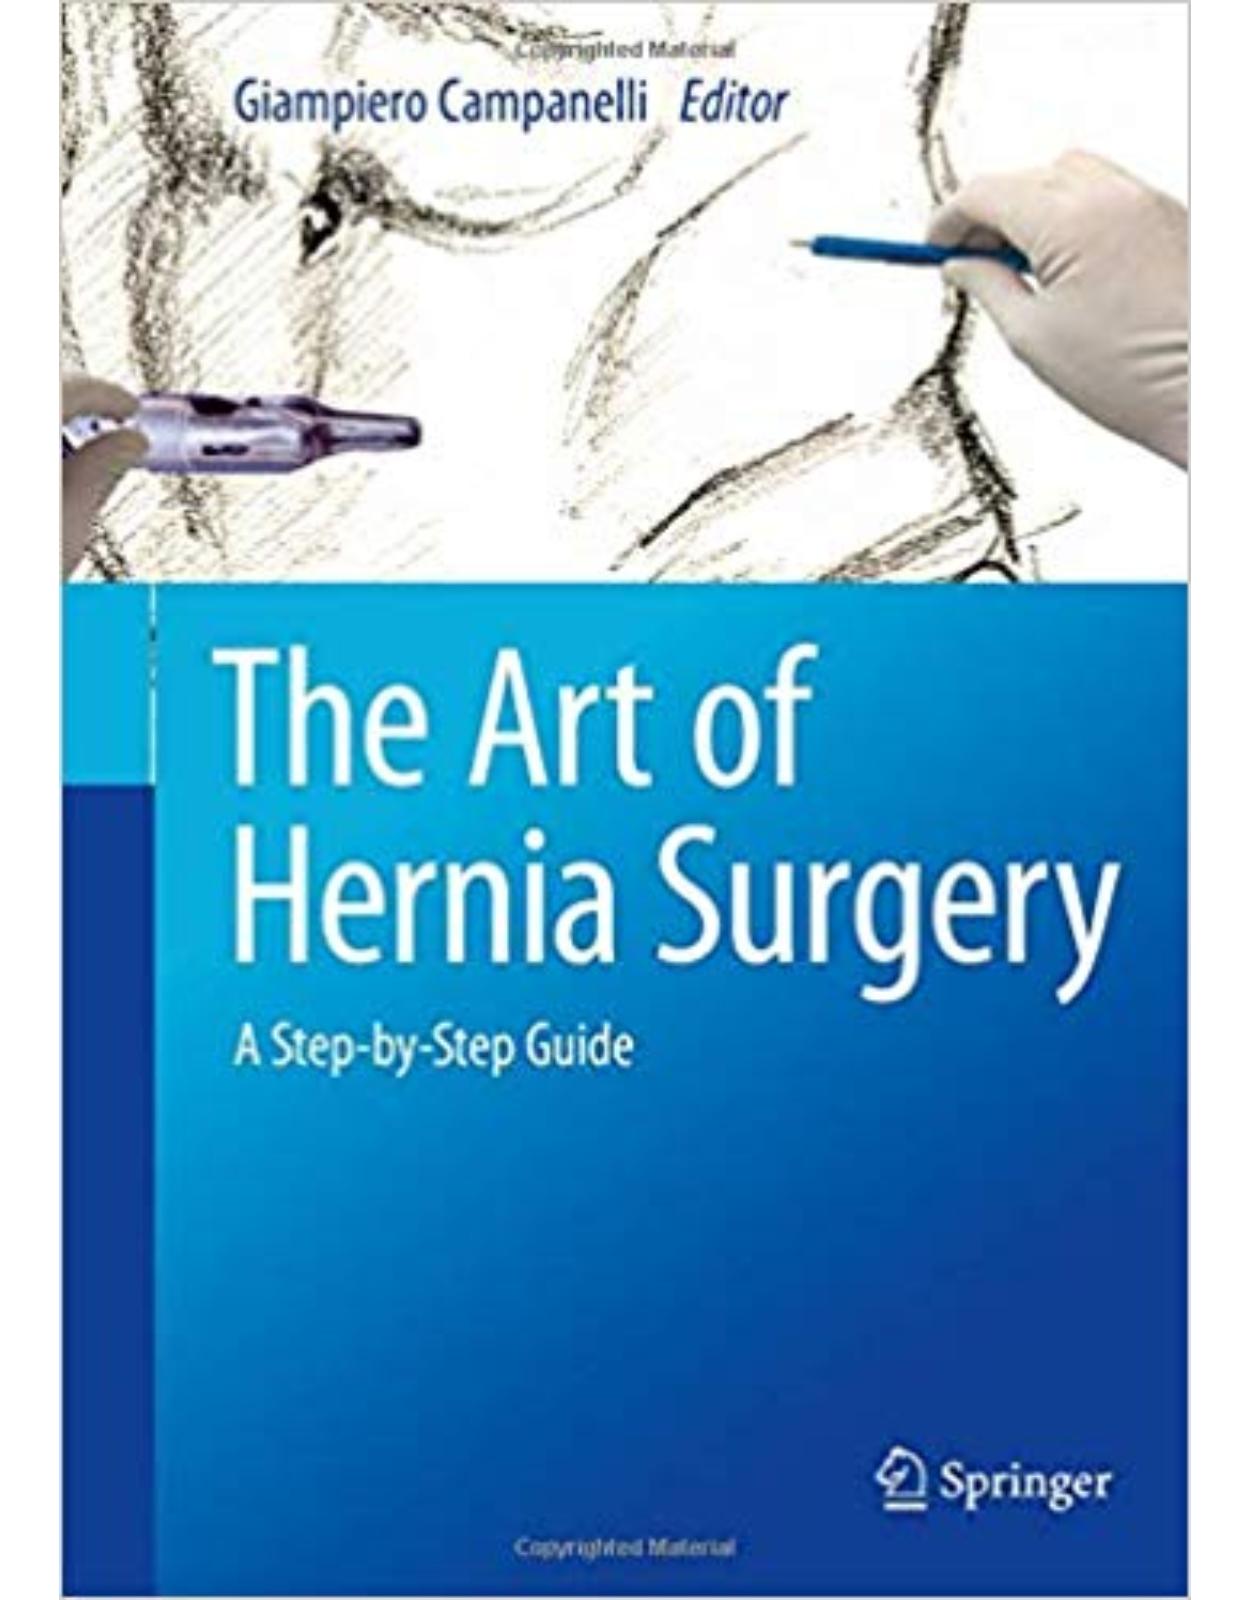 The Art of Hernia Surgery: A Step-by-Step Guide